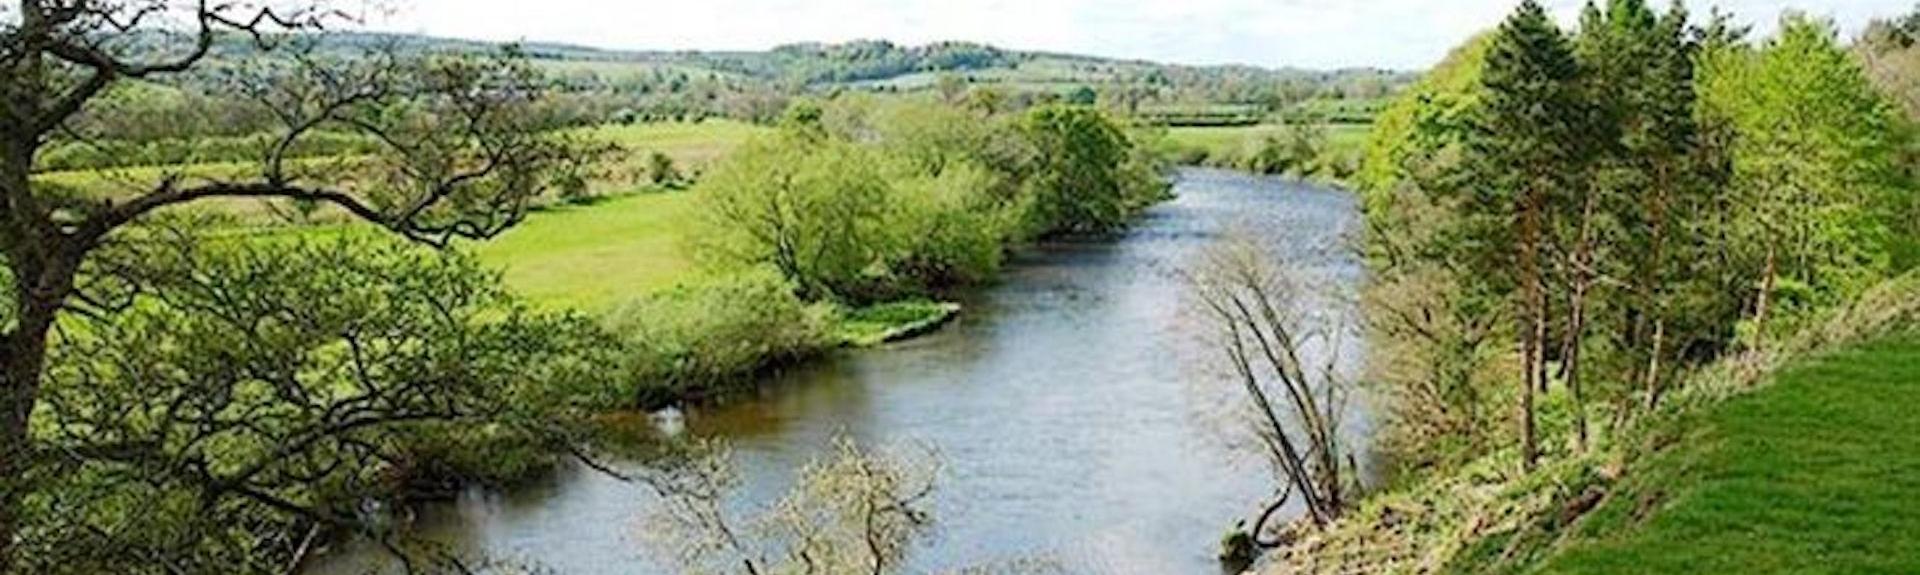 A wide tree-lined river winds through the Cumbrian Countryside near Glassonny